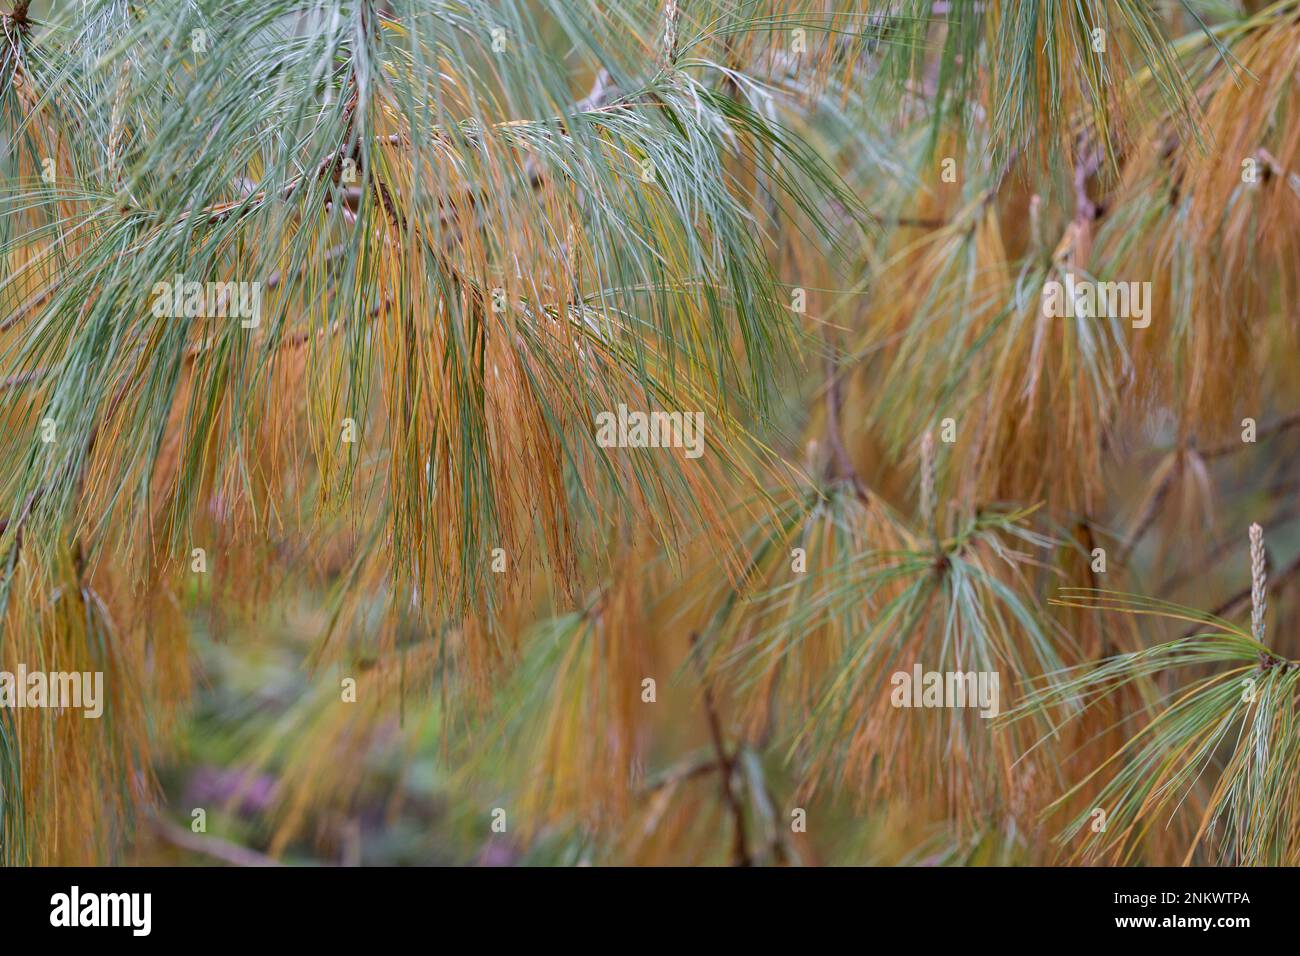 Close on a cluster of cones, part of the Longleaf Pine tree known for its endurance and long life. Pinus palustris Stock Photo